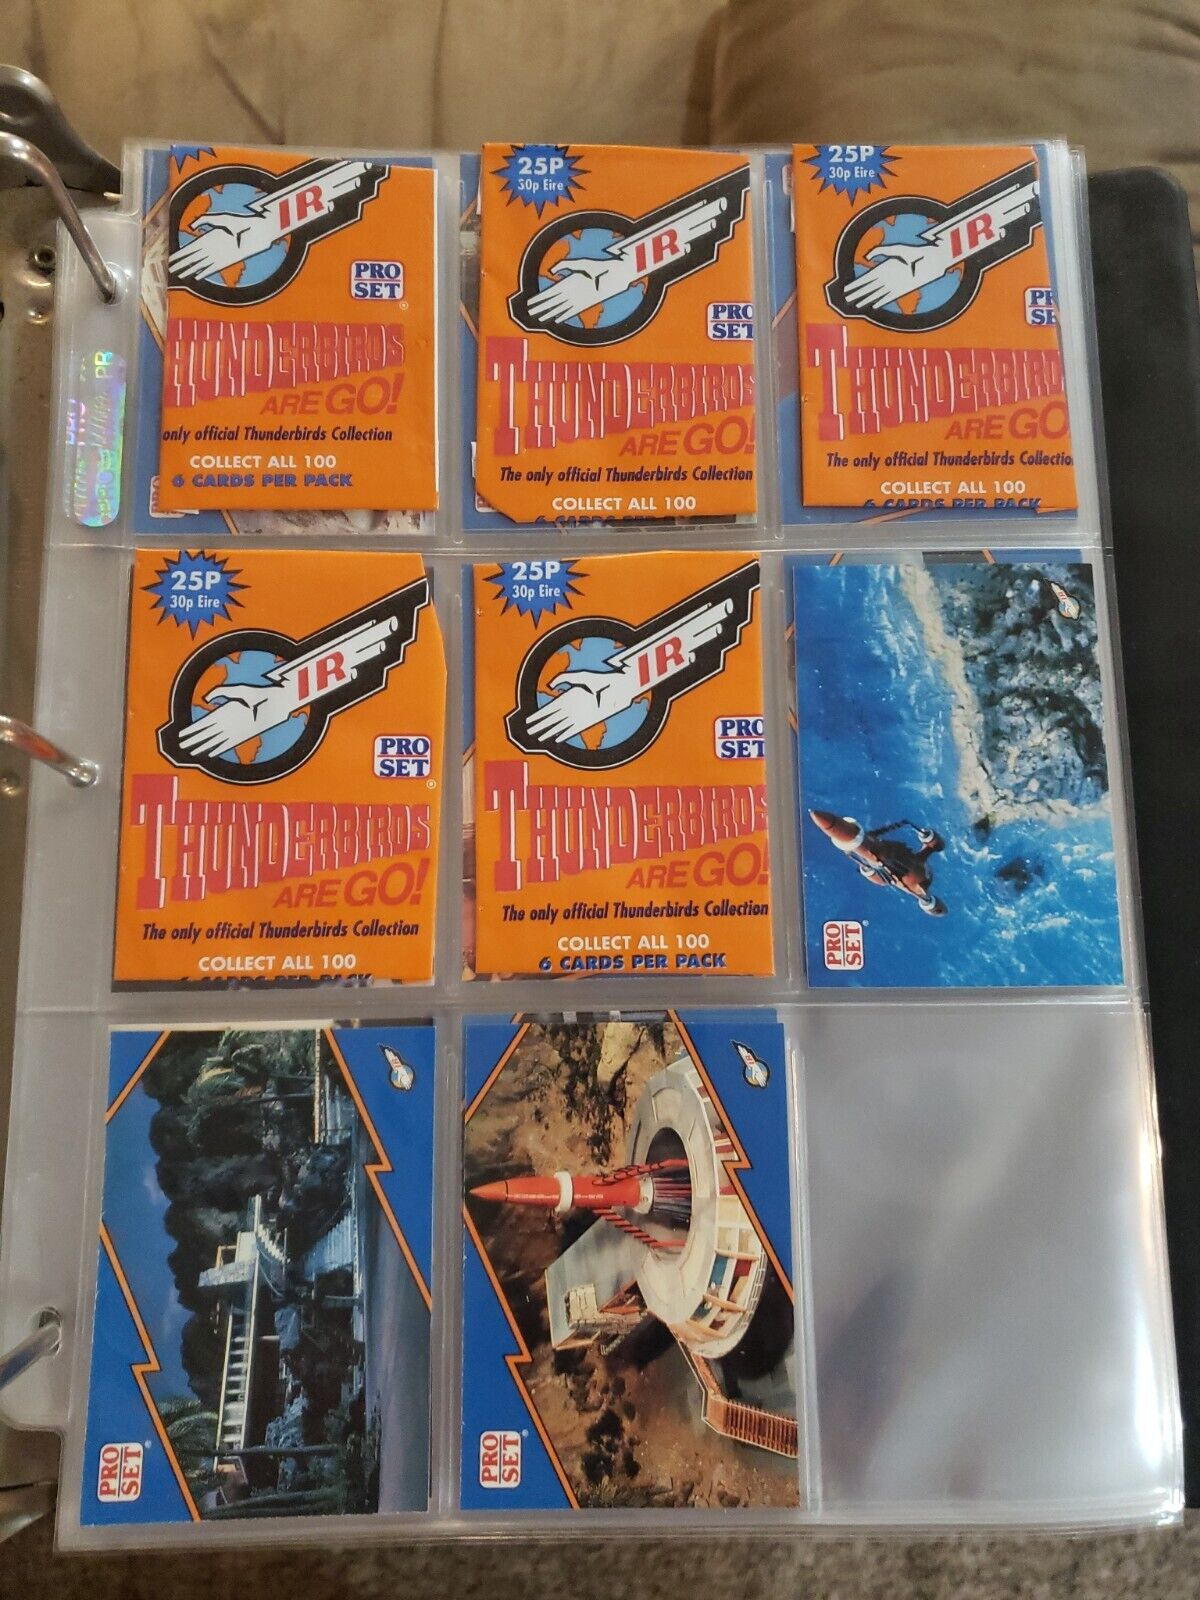 1992 Thunderbirds Are Go Complete Trading Card Set 1-100 Pro Set Plus 5 Wrappers